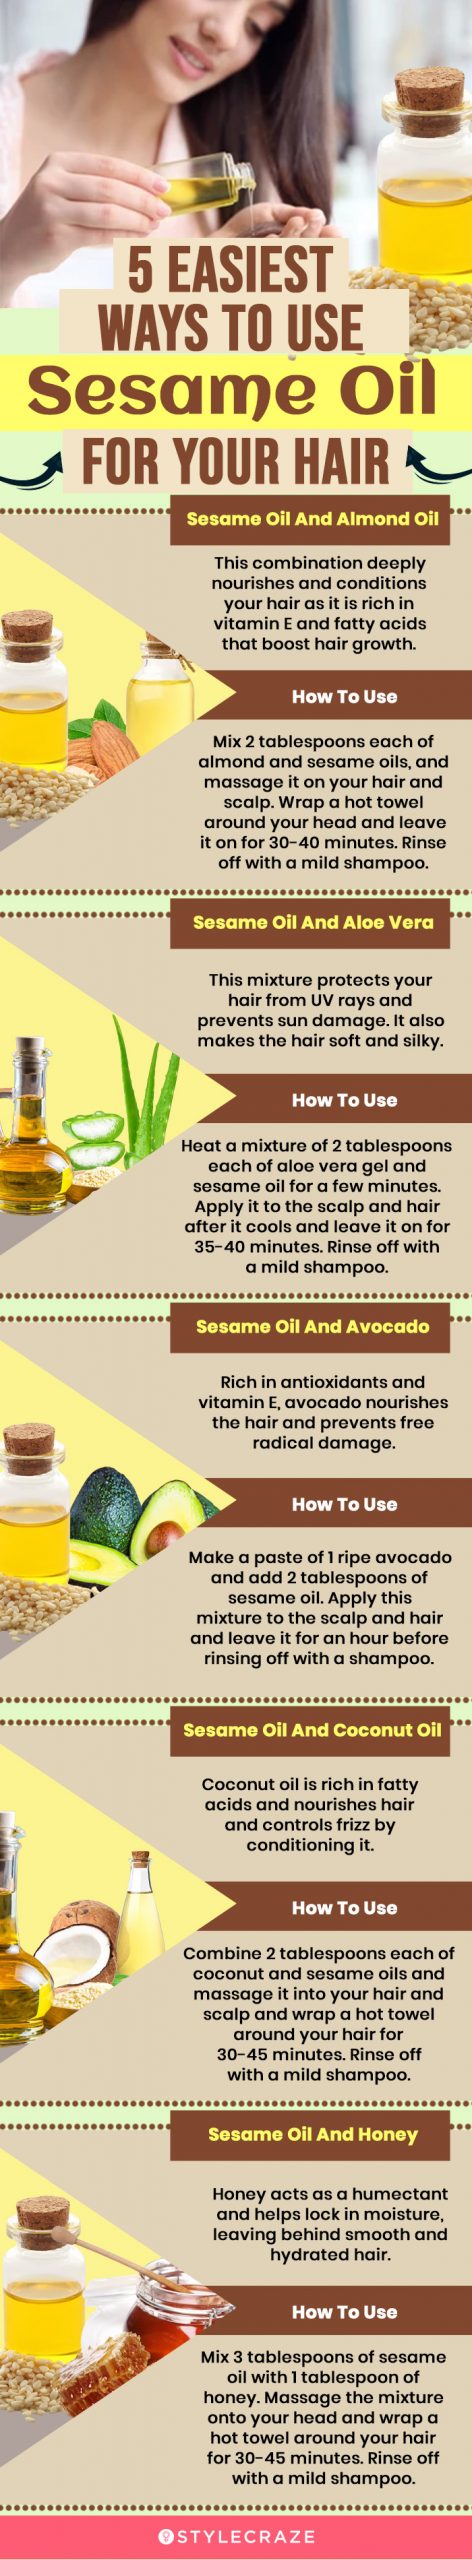 5 easiest ways to use sesame oil for hair (infographic)